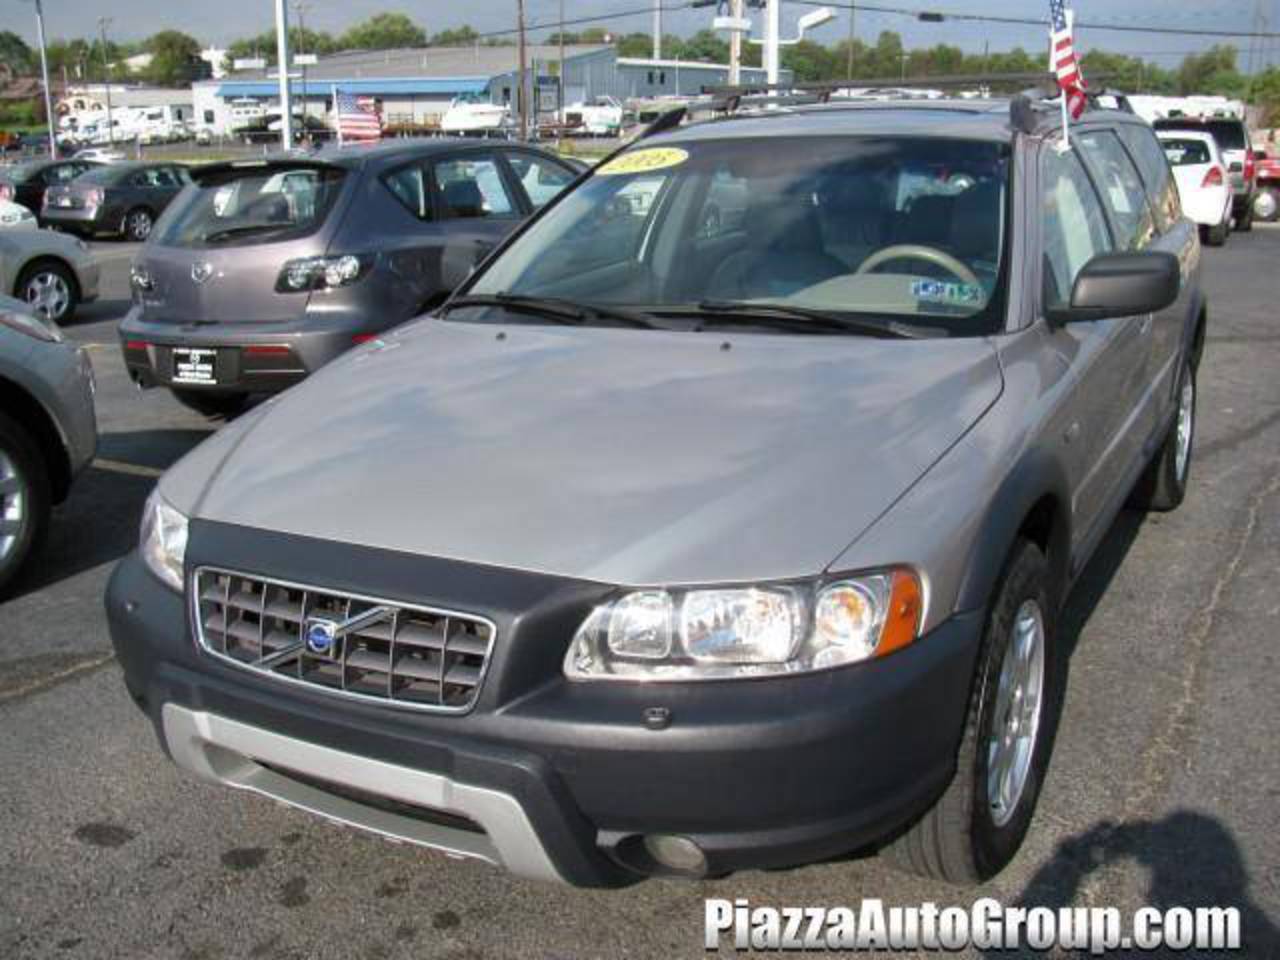 Volvo XC70 Crosscountry AWD. View Download Wallpaper. 640x480. Comments